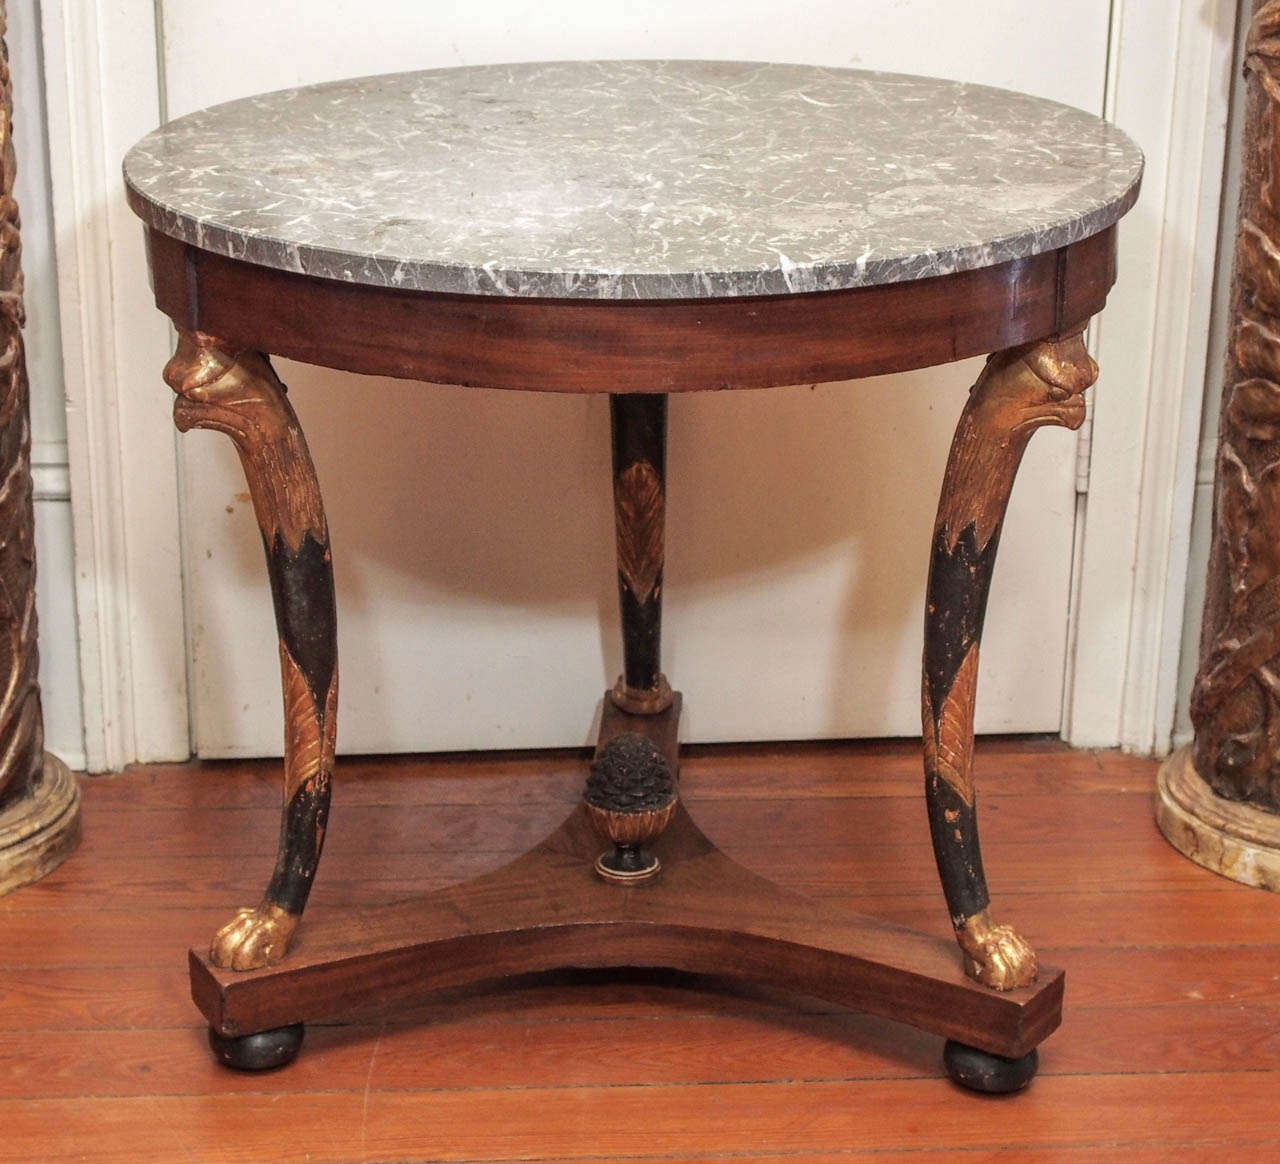 French Empire Marble Top Gueridon with monopodial eagles in patinated paint and gilt with a artichoke finial in the center.